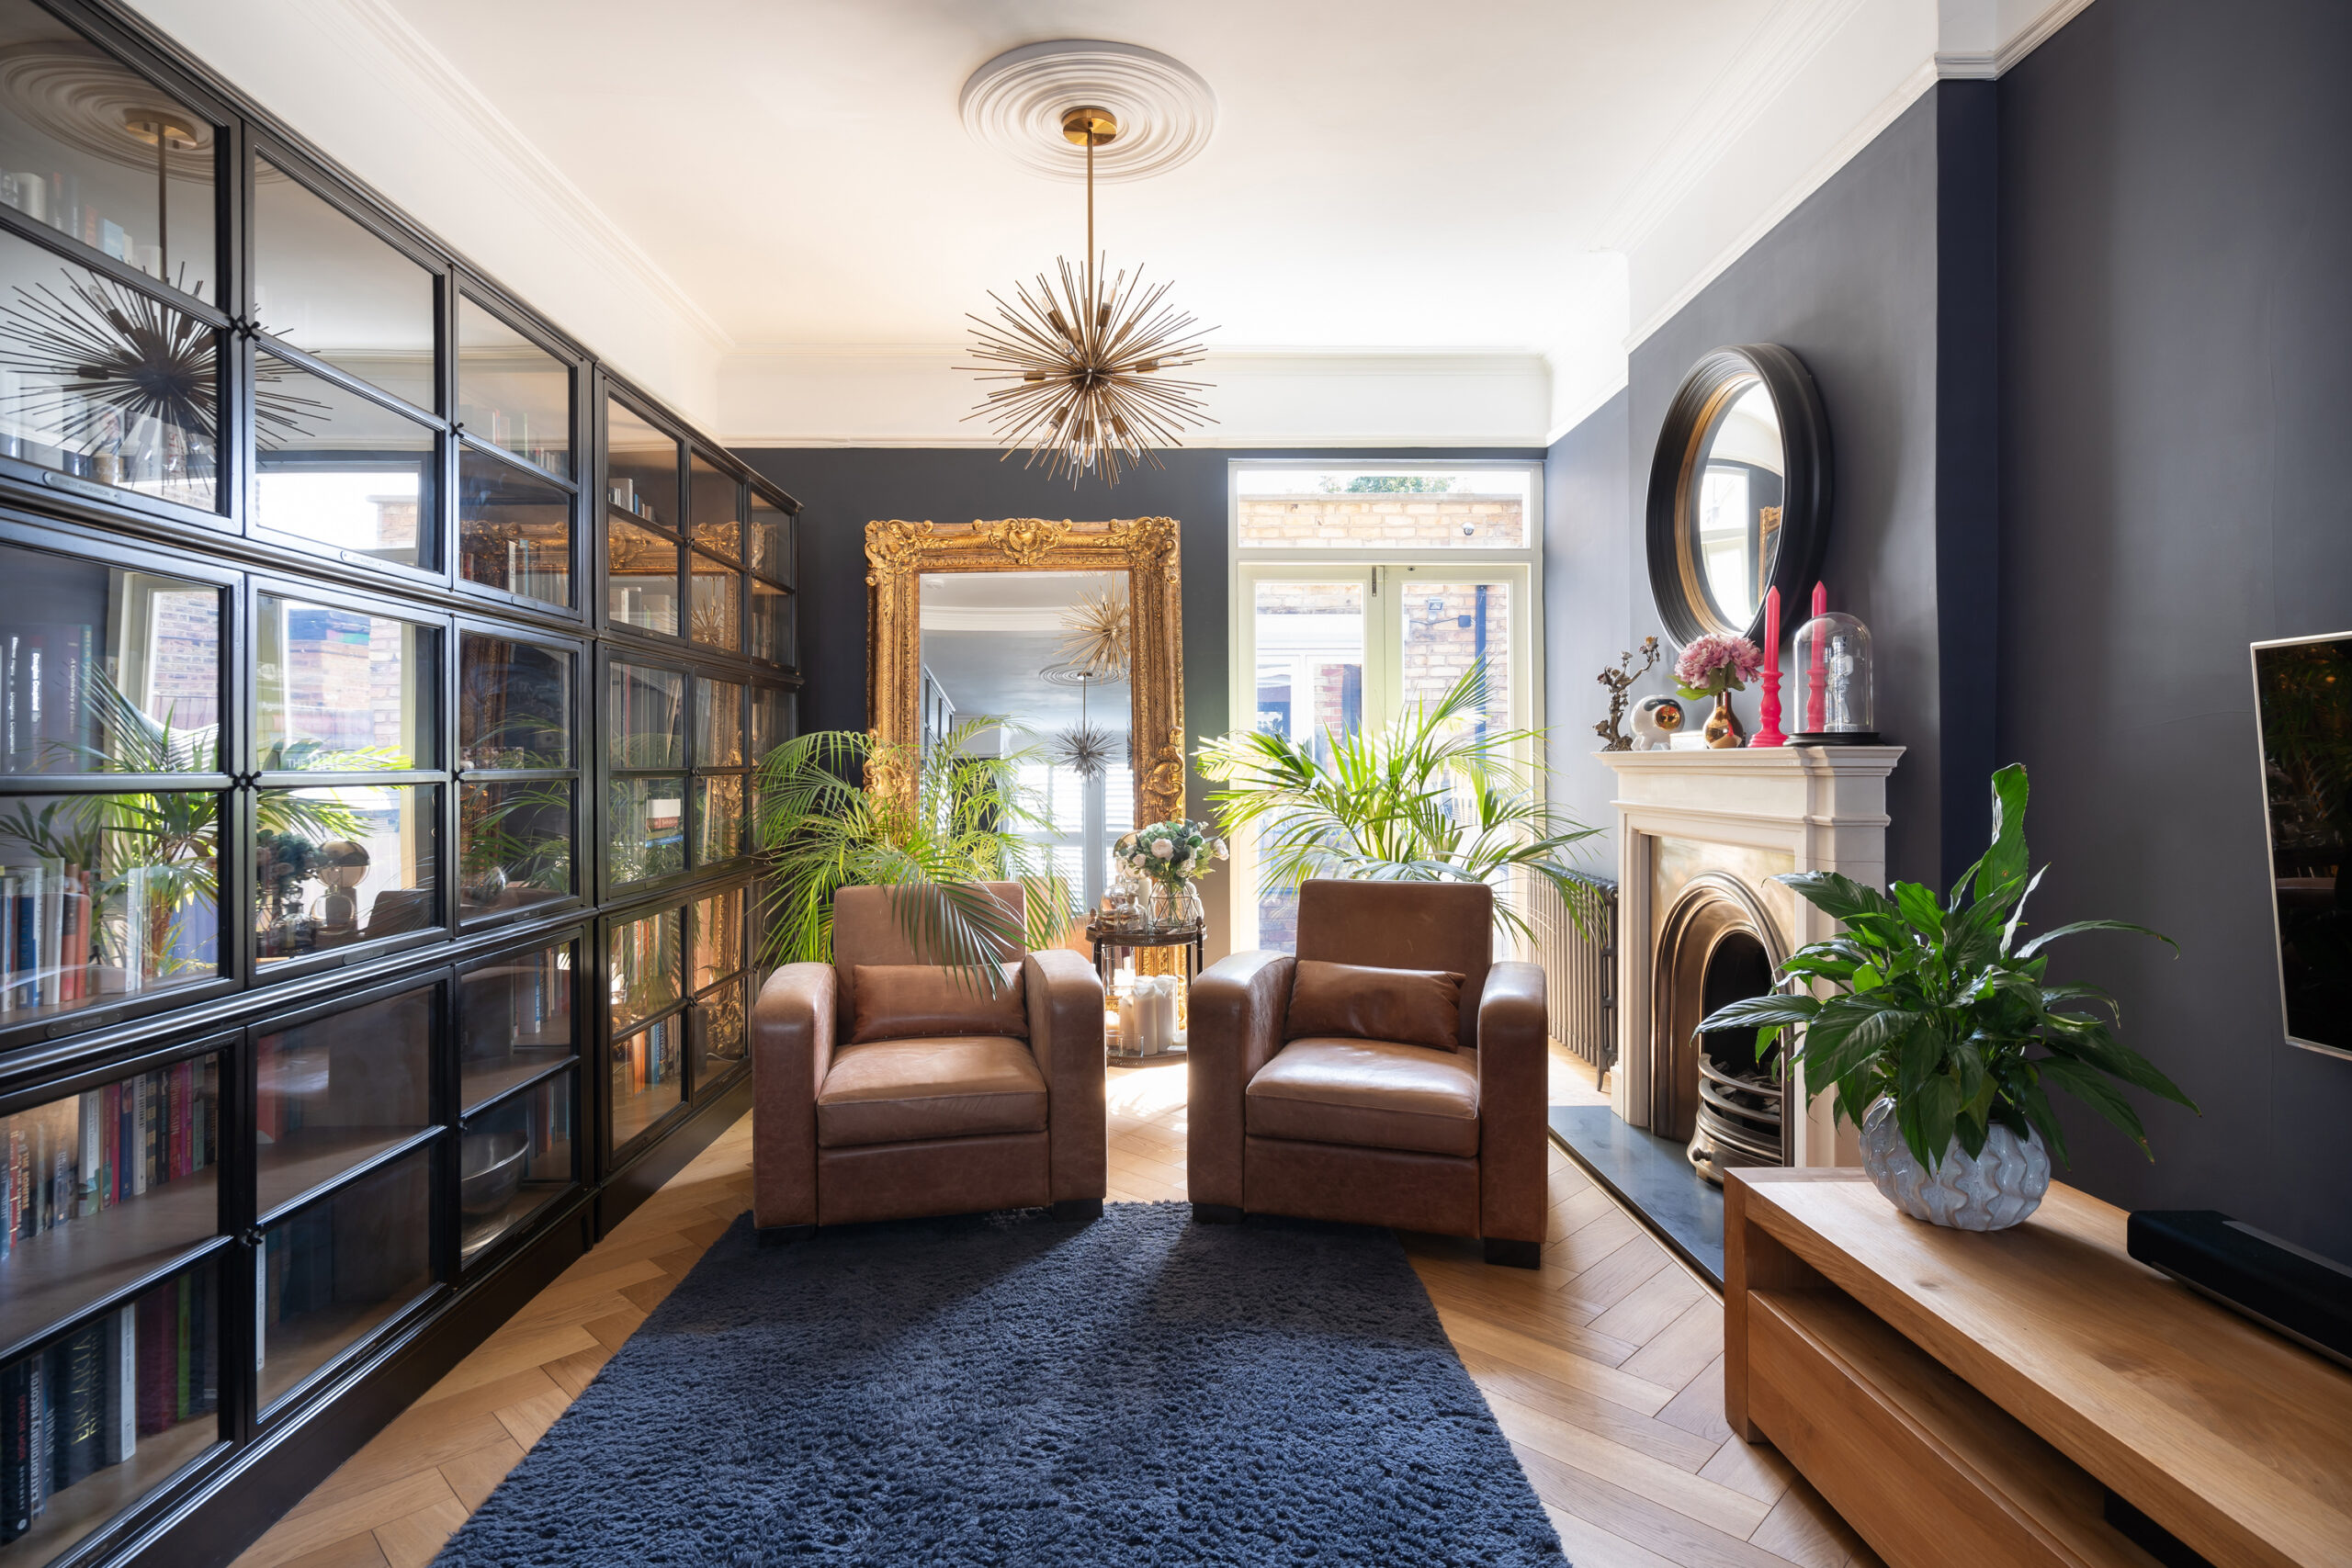 For Sale: Wormholt Road Shepherd's Bush W8 modern reception room with black-framed cabinets and stylish interior design